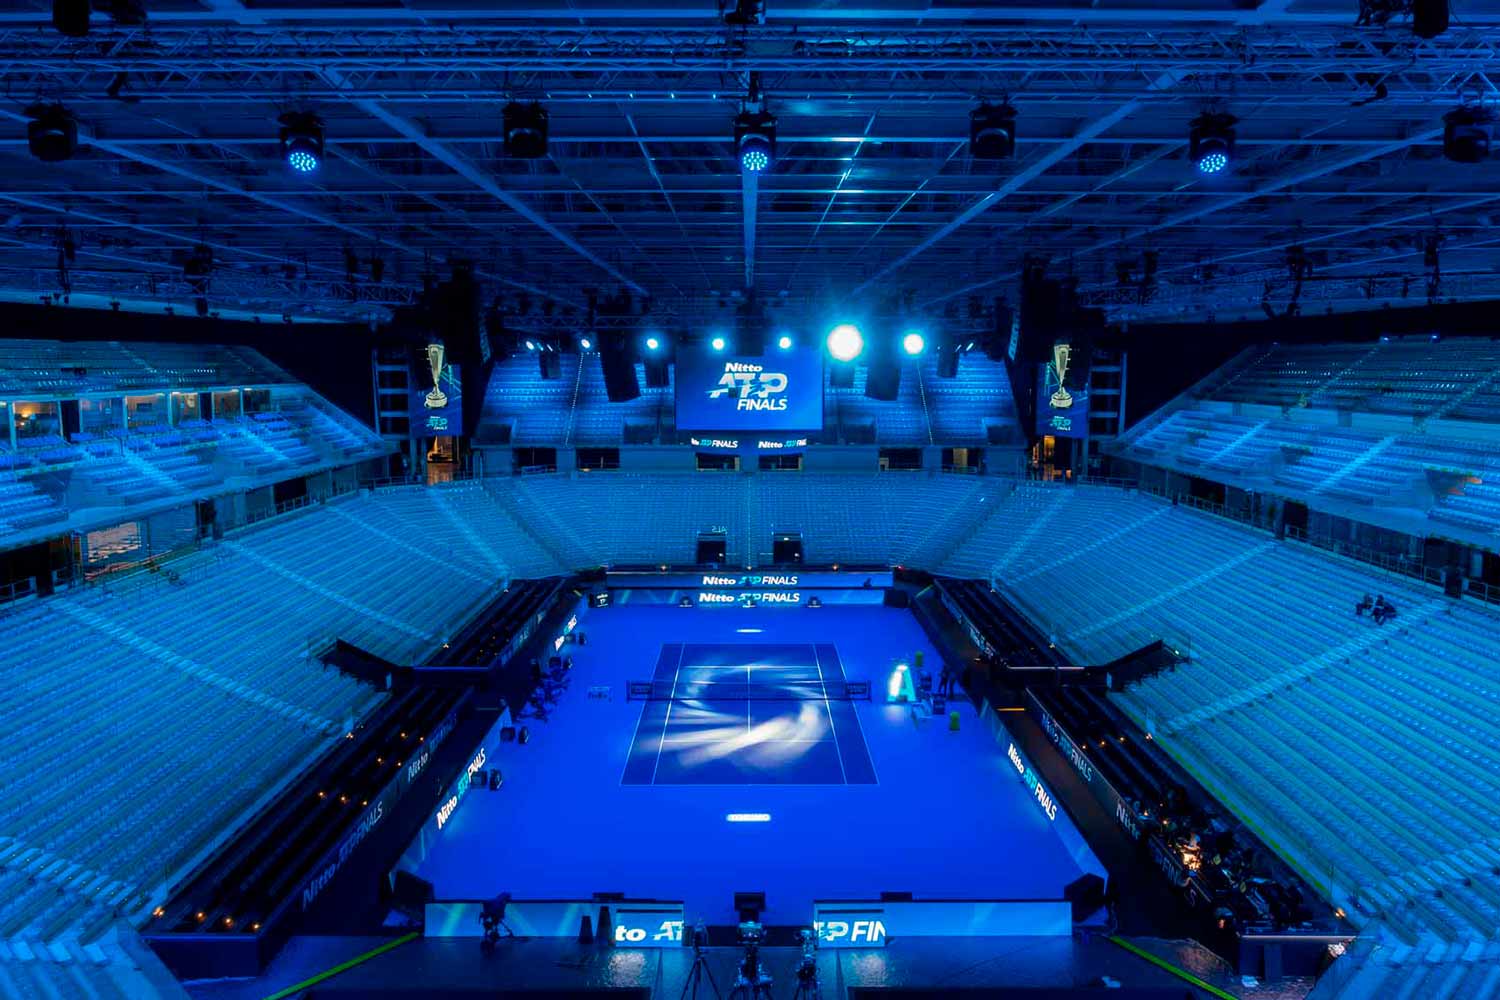 A look at the (dismountable) structures created for the Atp finals in turin